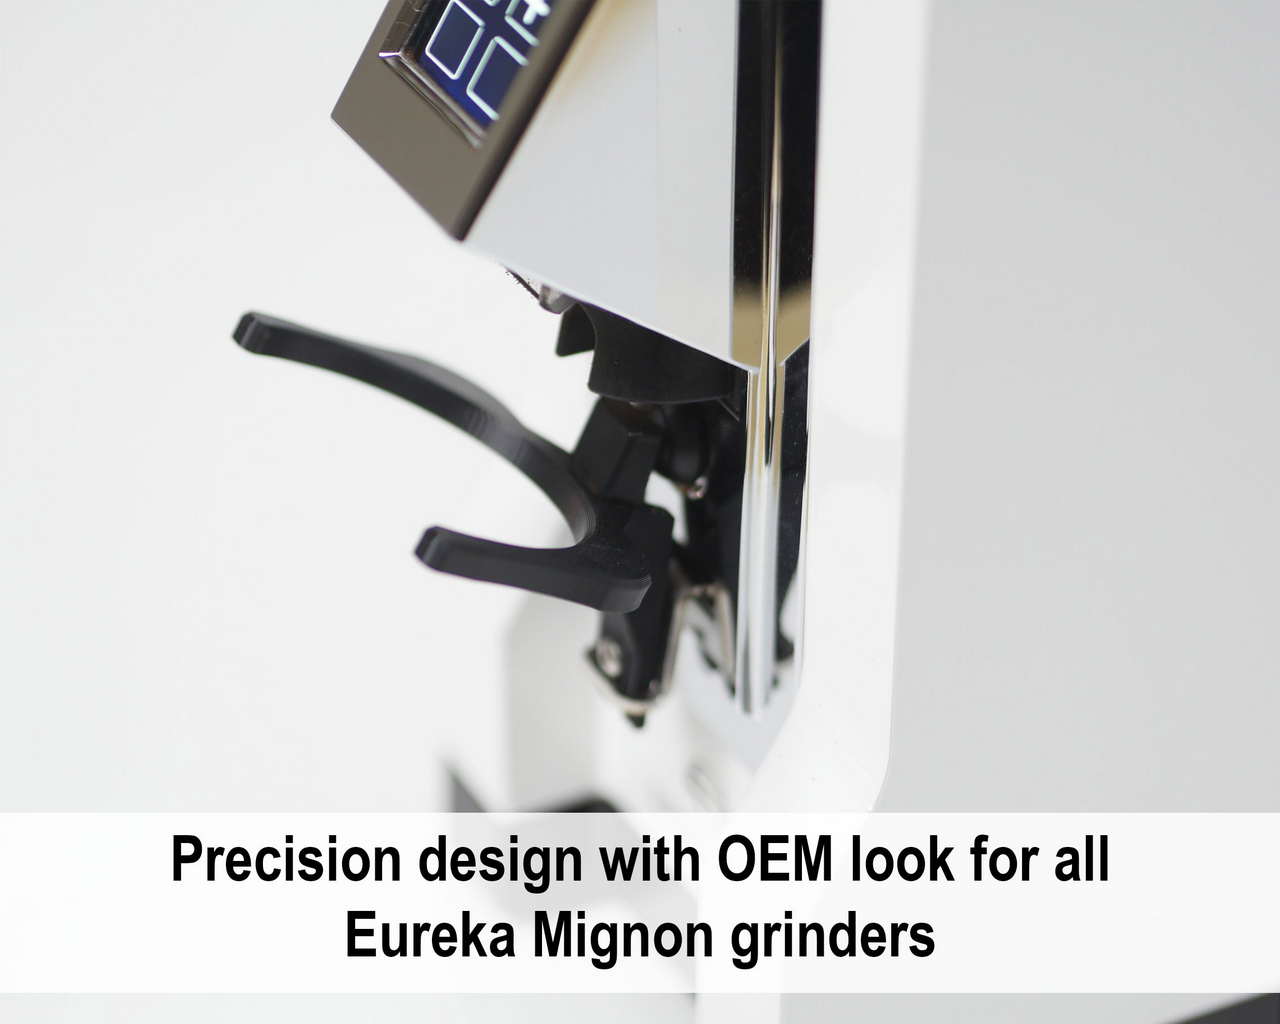 Angled Dosing Cup & Switch Trigger for Eureka Mignon